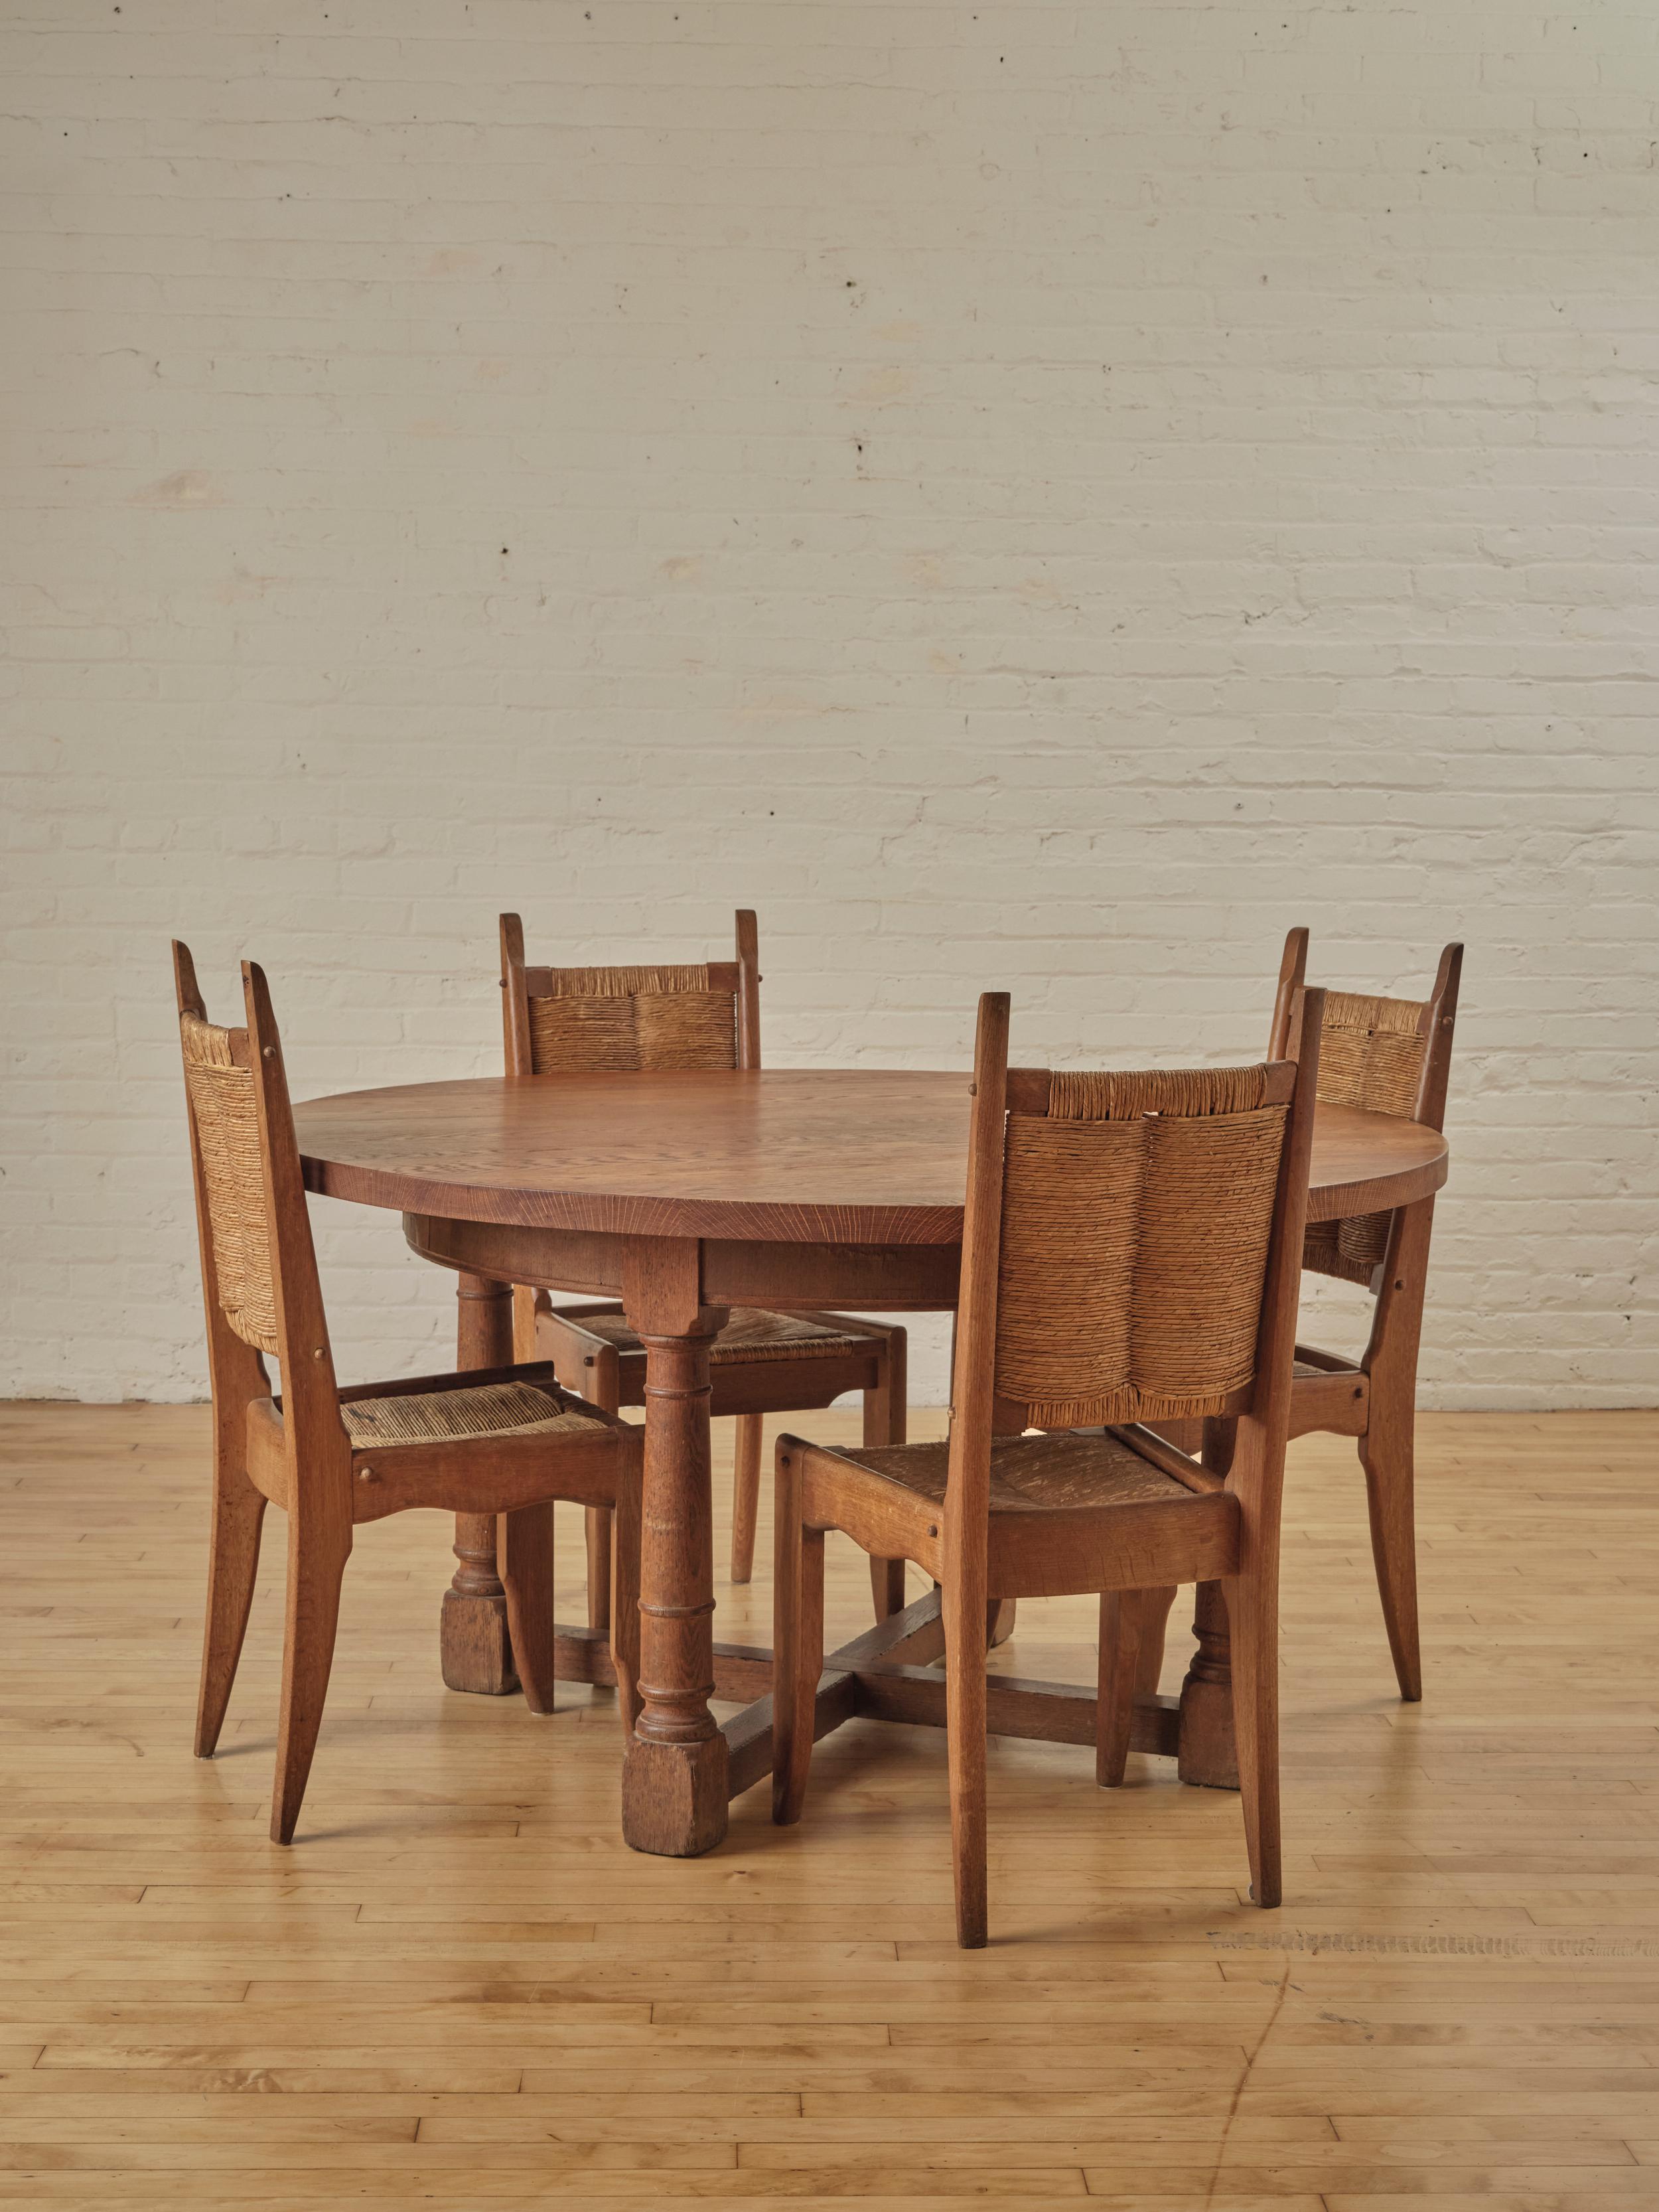 Early 1900's Circular Dining Table crafted from oak wood with four inter-joined legs.

